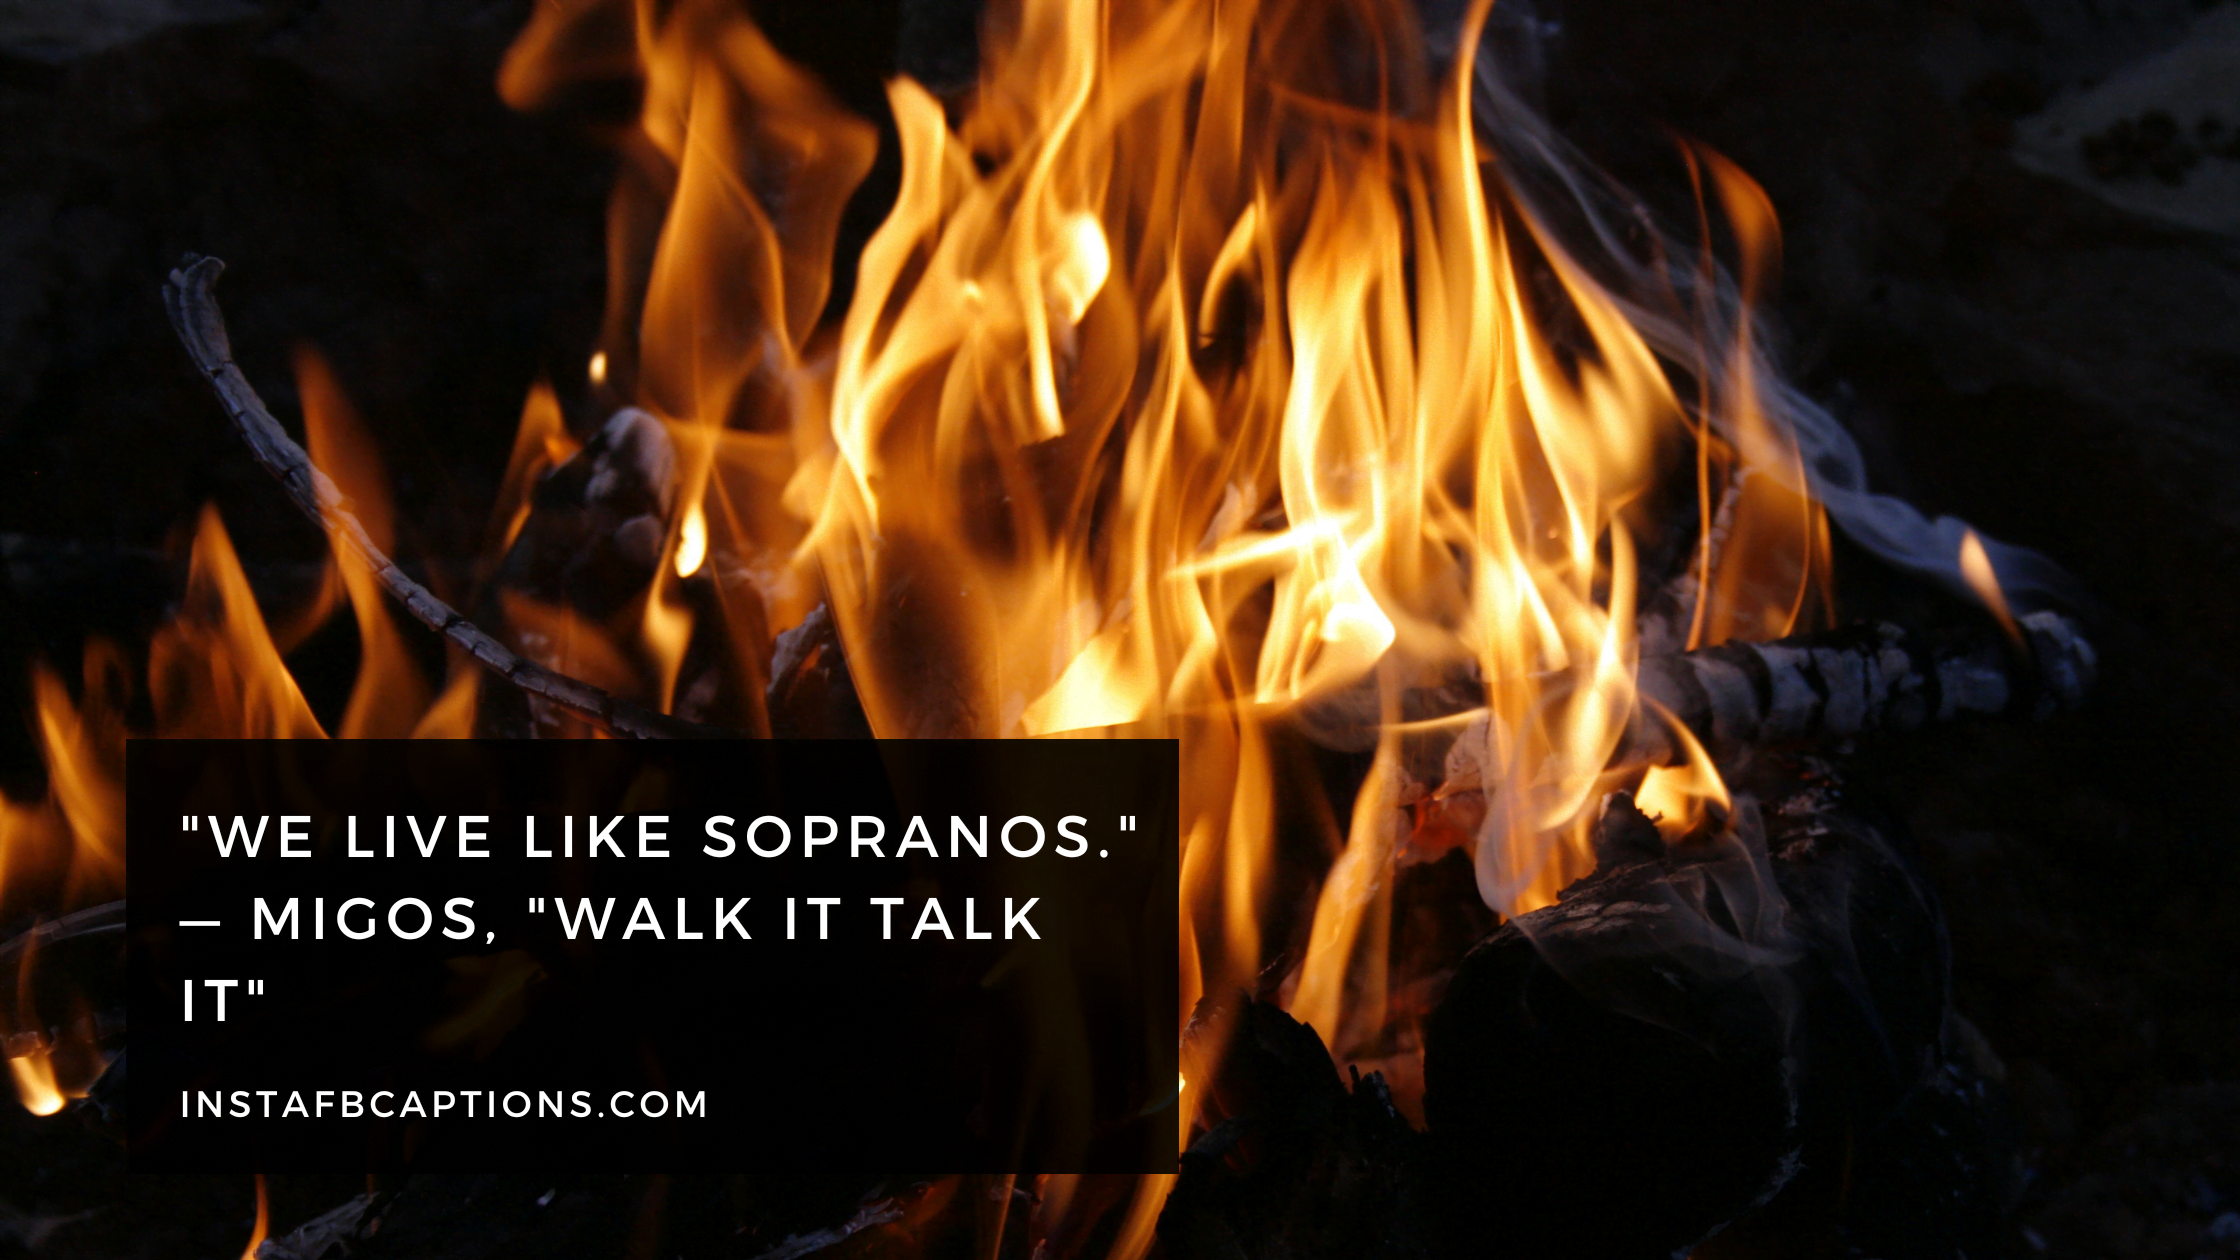 "We live like Sopranos." — Migos, "Walk It Talk It"  - Fire Instagram Captions from Rap Songs  - [NEW] Fire Captions Quotes For Instagram in 2023